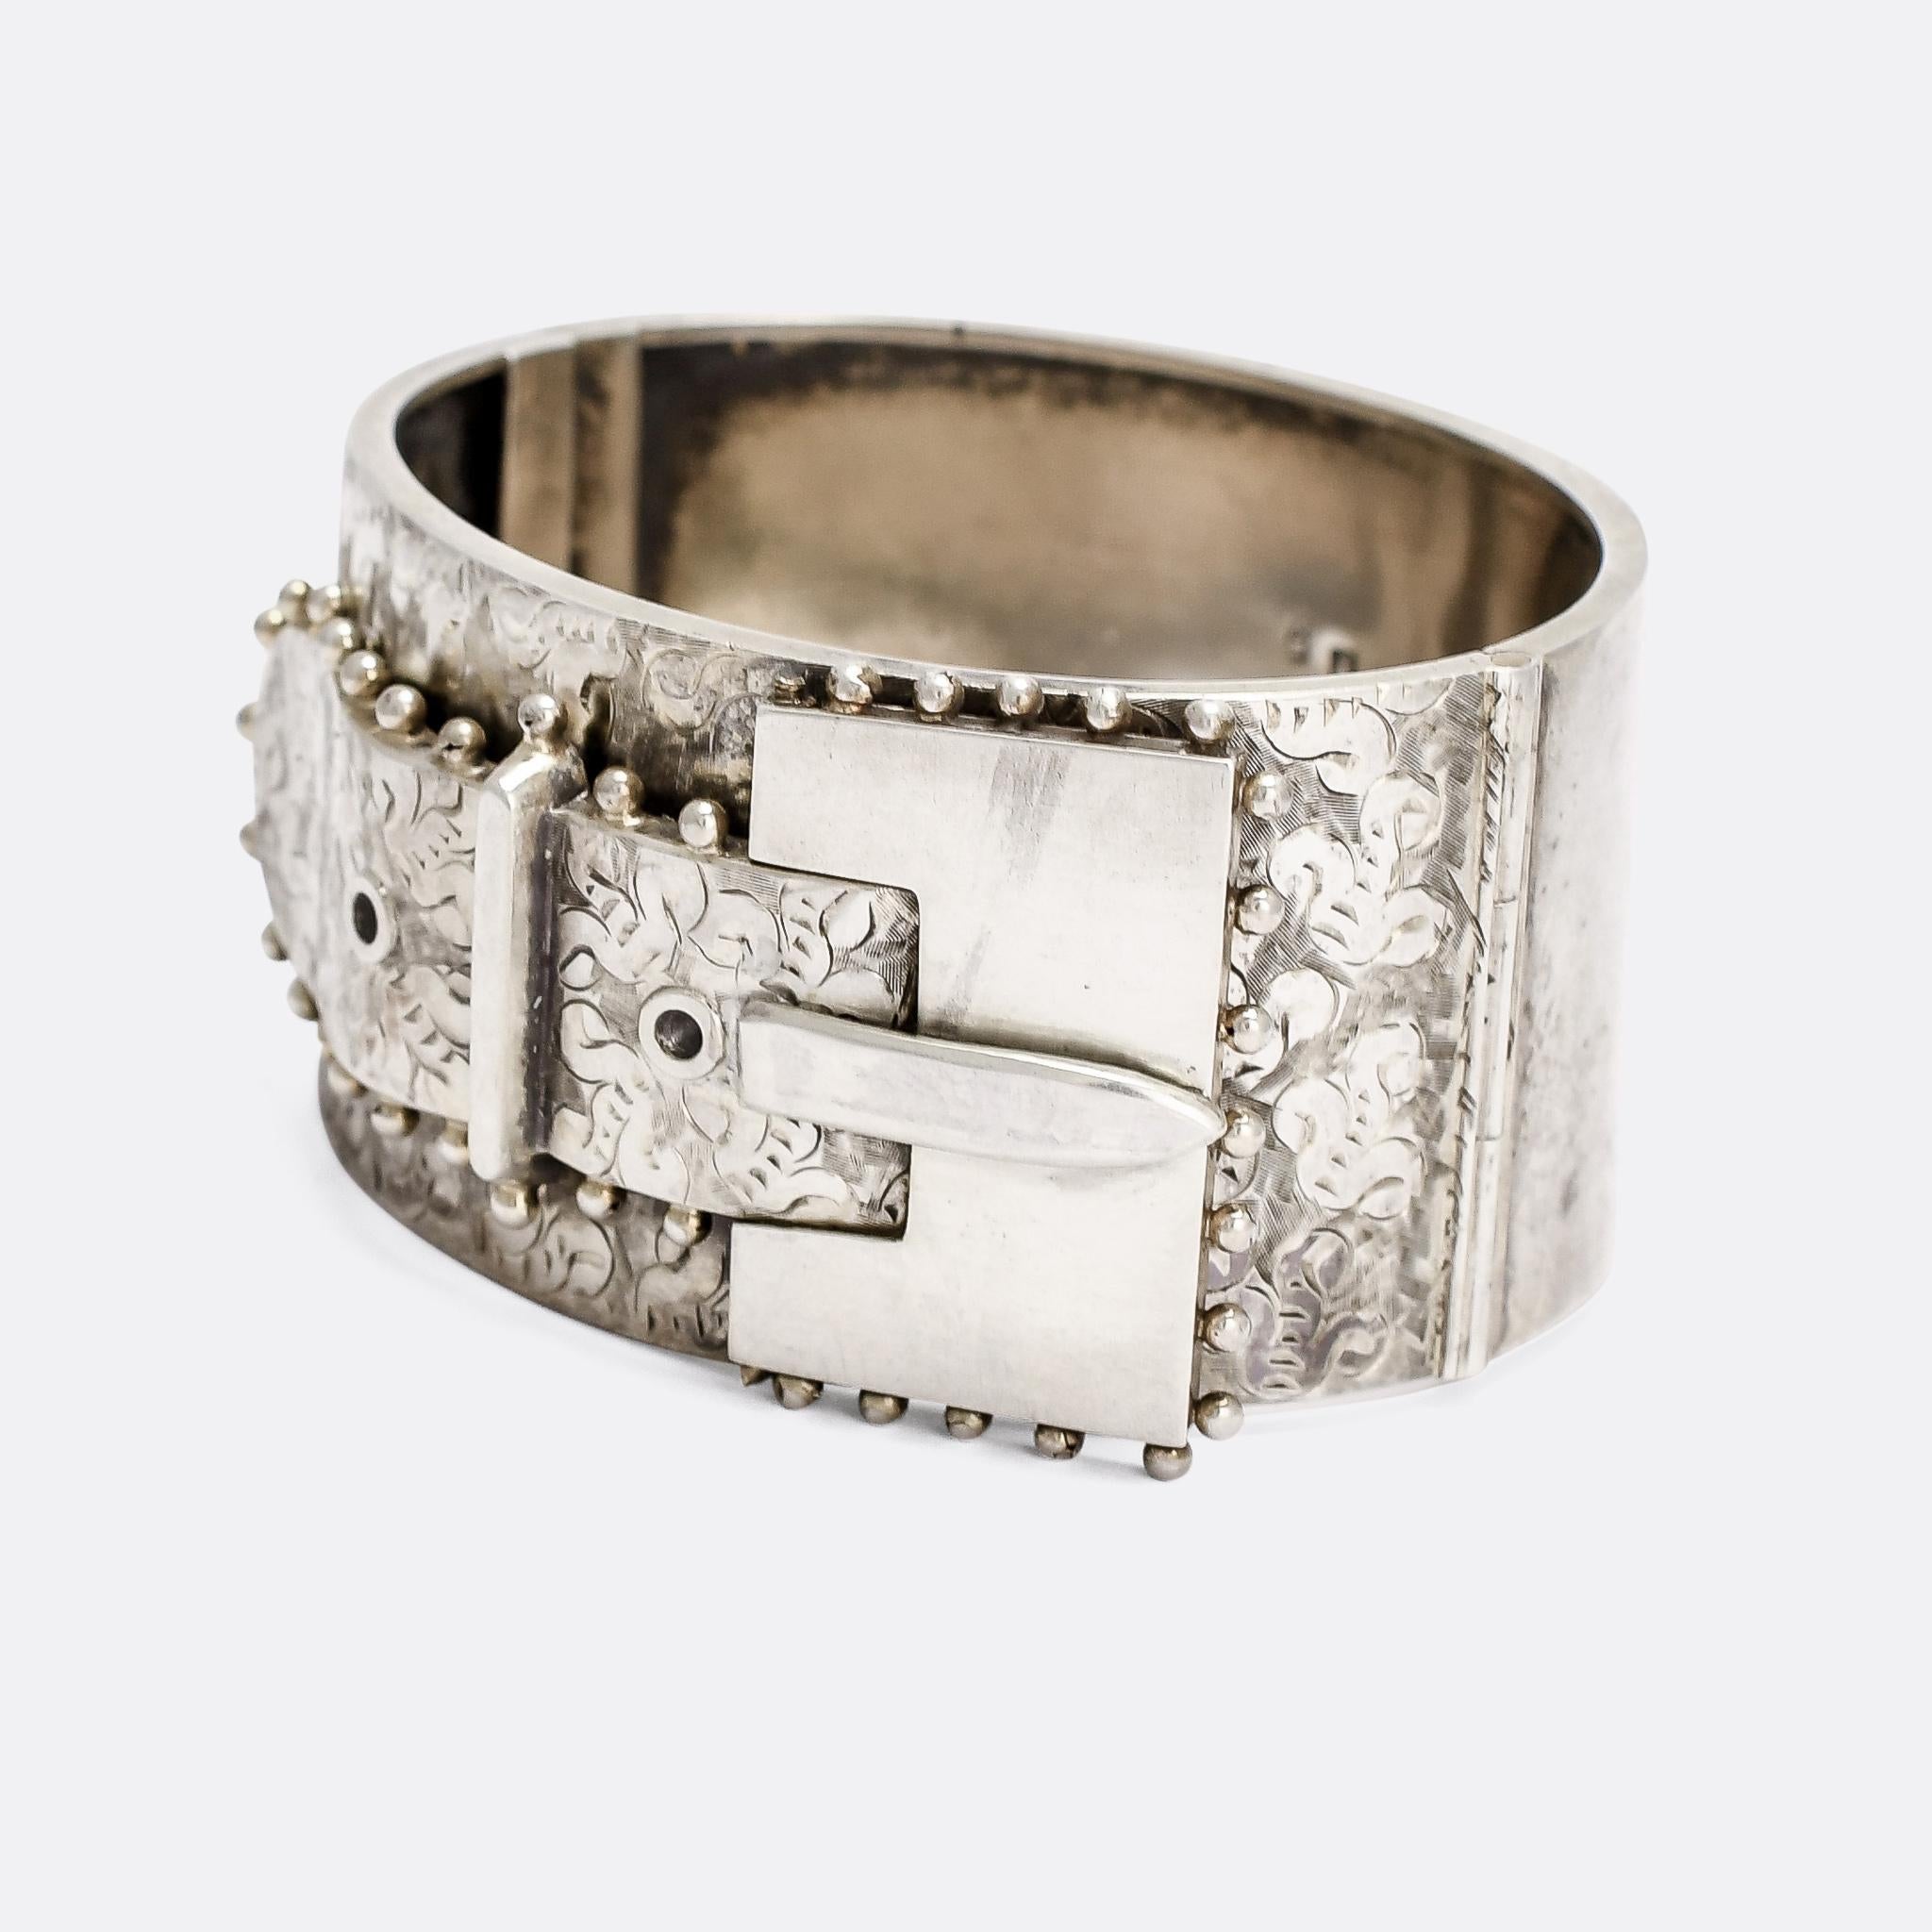 A big and bold antique silver cuff bangle dating from the latter half of the 19th Century. It's intricately engraved with abstract foliate motifs, and features a large square buckle, distinctly modernist in feel. Crafted in Sterling Silver